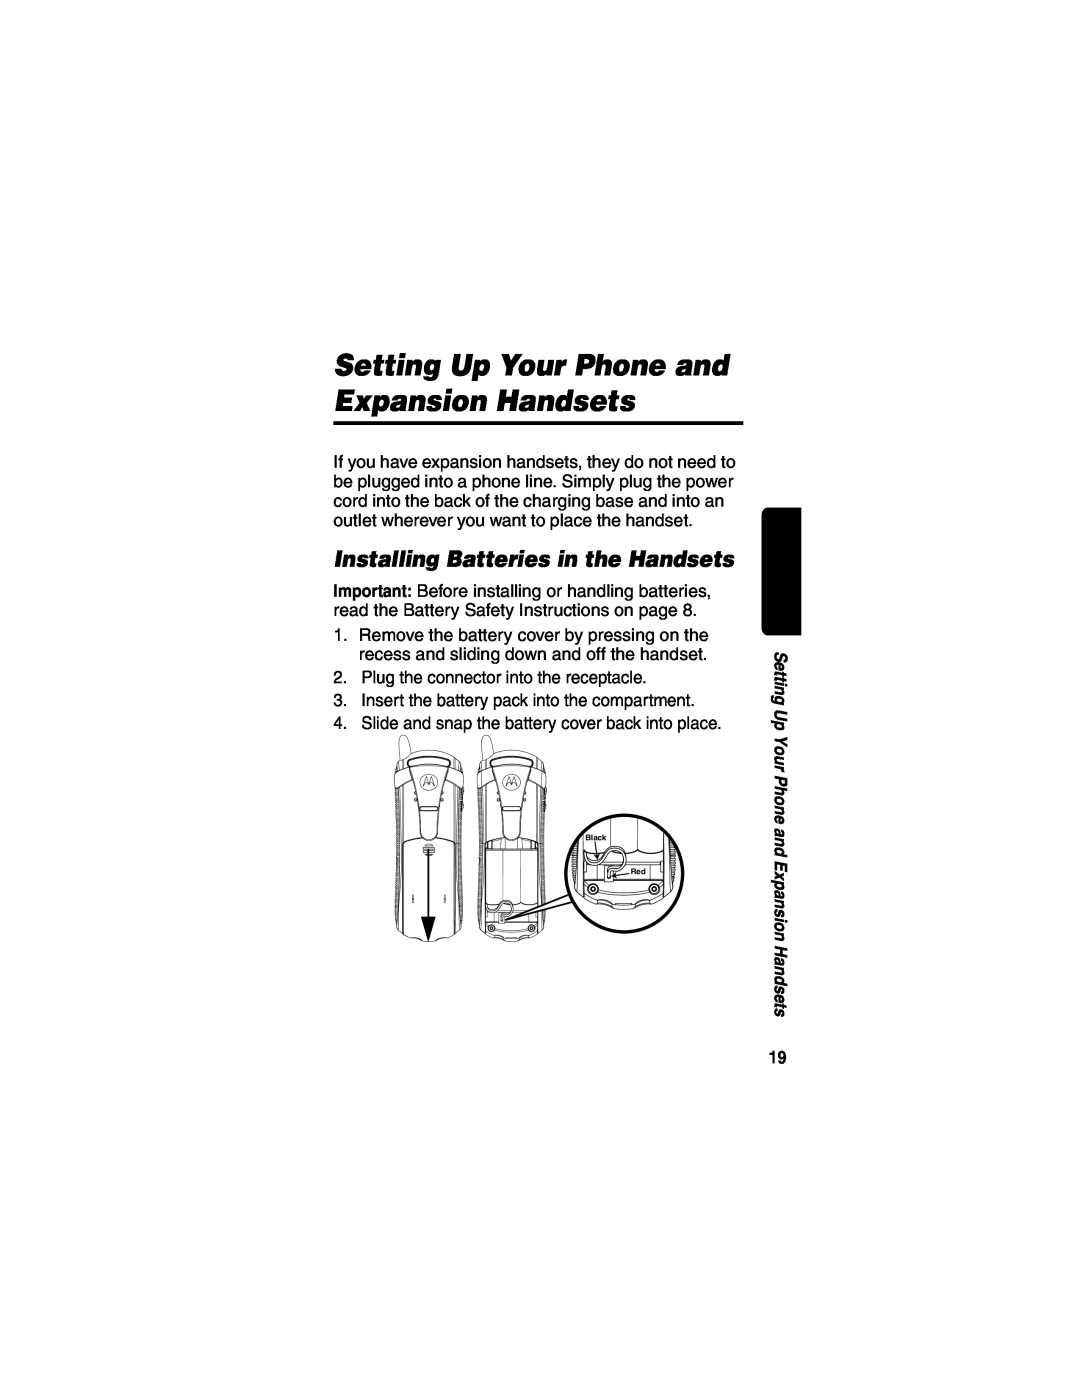 Motorola MD490 manual Setting Up Your Phone and Expansion Handsets, Installing Batteries in the Handsets 